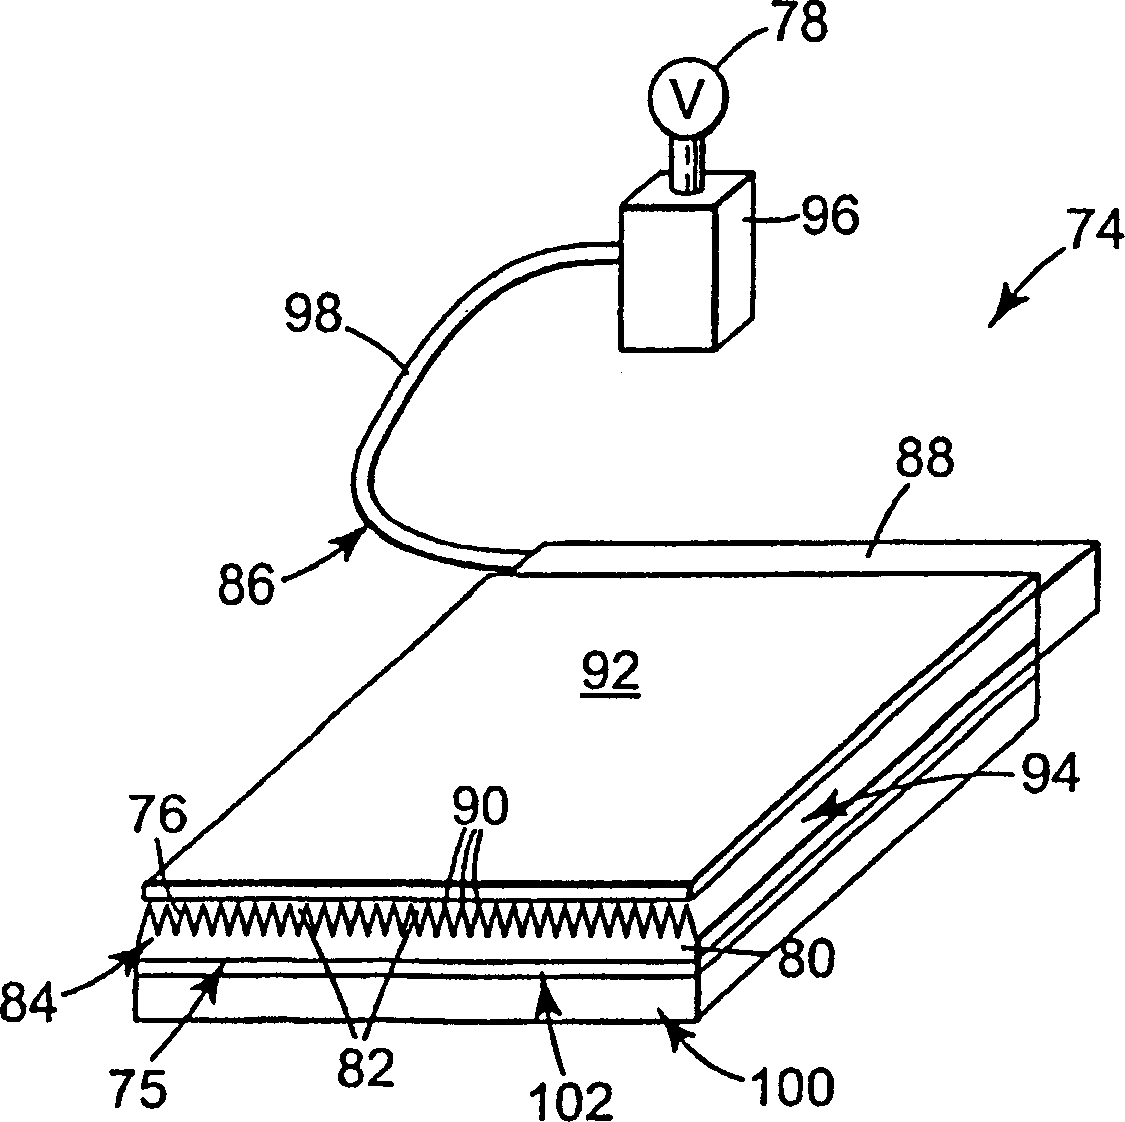 Microstructured surface film assembly for liquid acquisition and transprot